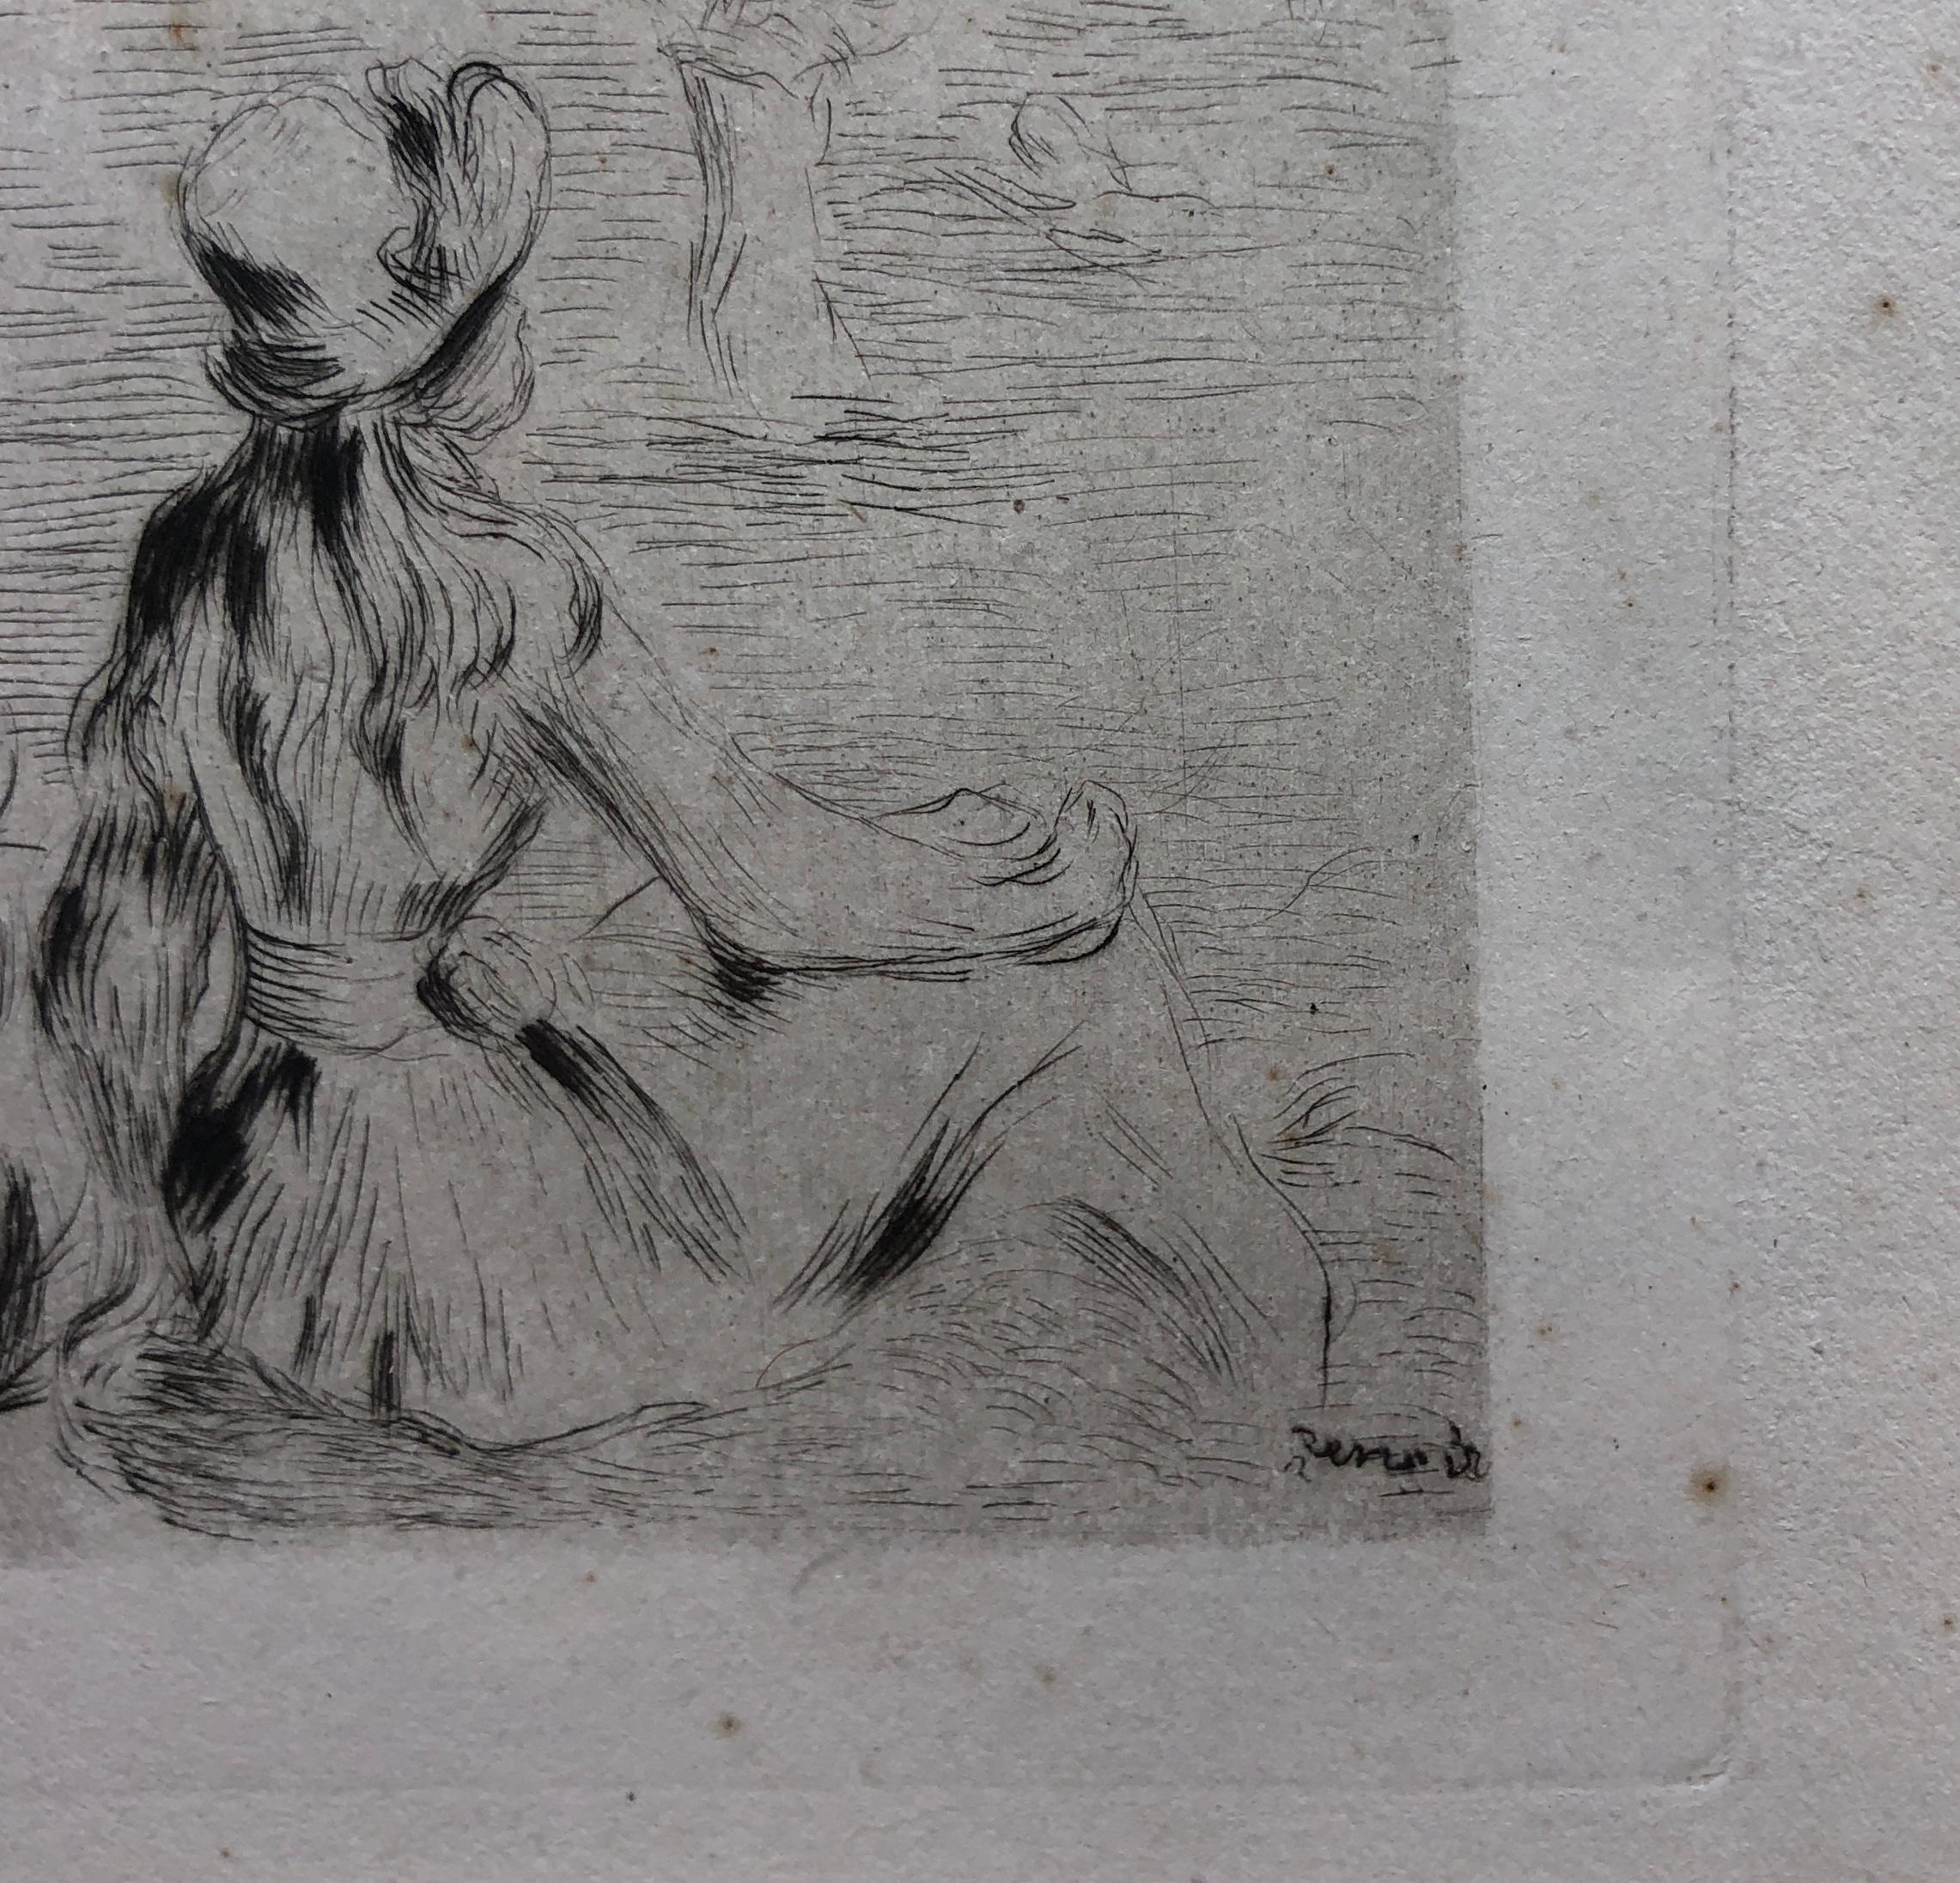 This piece is an original etching on laid paper created by Pierre-Auguste Renoir circa 1892 and published in 1919. It is an example of the second state and bears the artist's signature in the plate. The image measures 5.5 x 3.7 inches and the framed